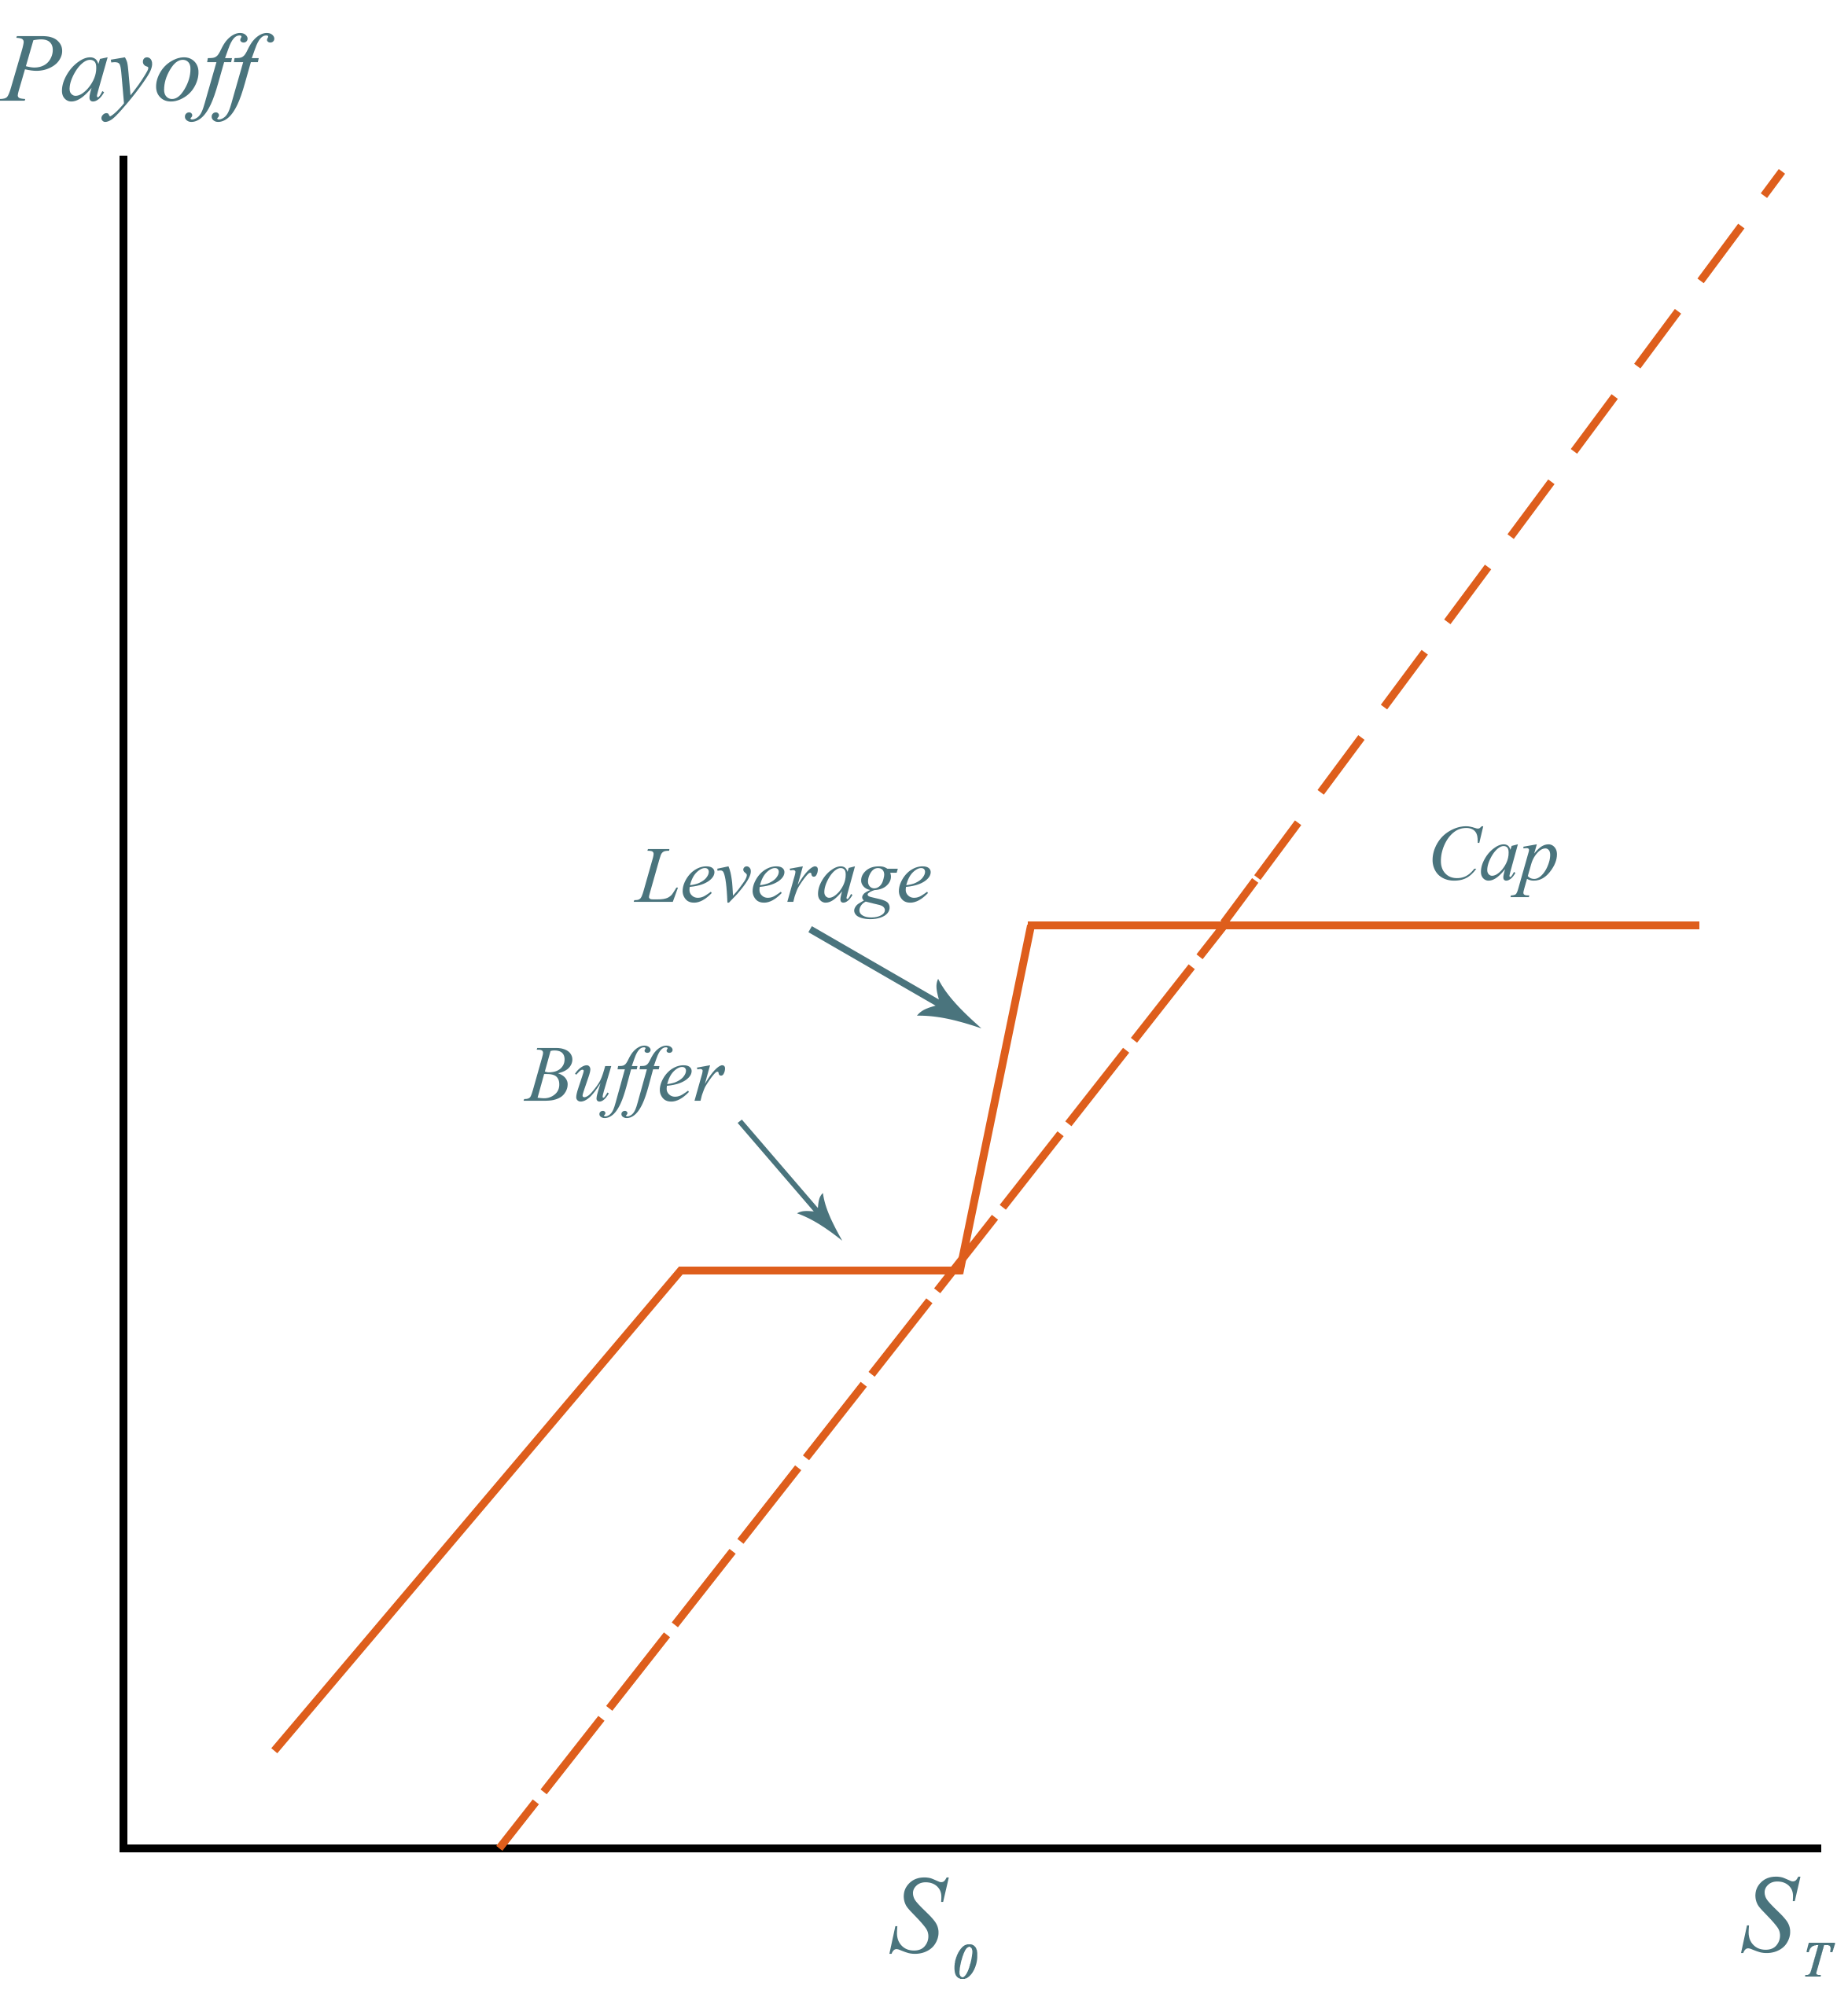 A graph demonstrating payoff over time for Buffered PLUS®, Partial Protection Return Optimization Securities, Equity Buffered Notes, and Leverage Equity Index-Linked Notes